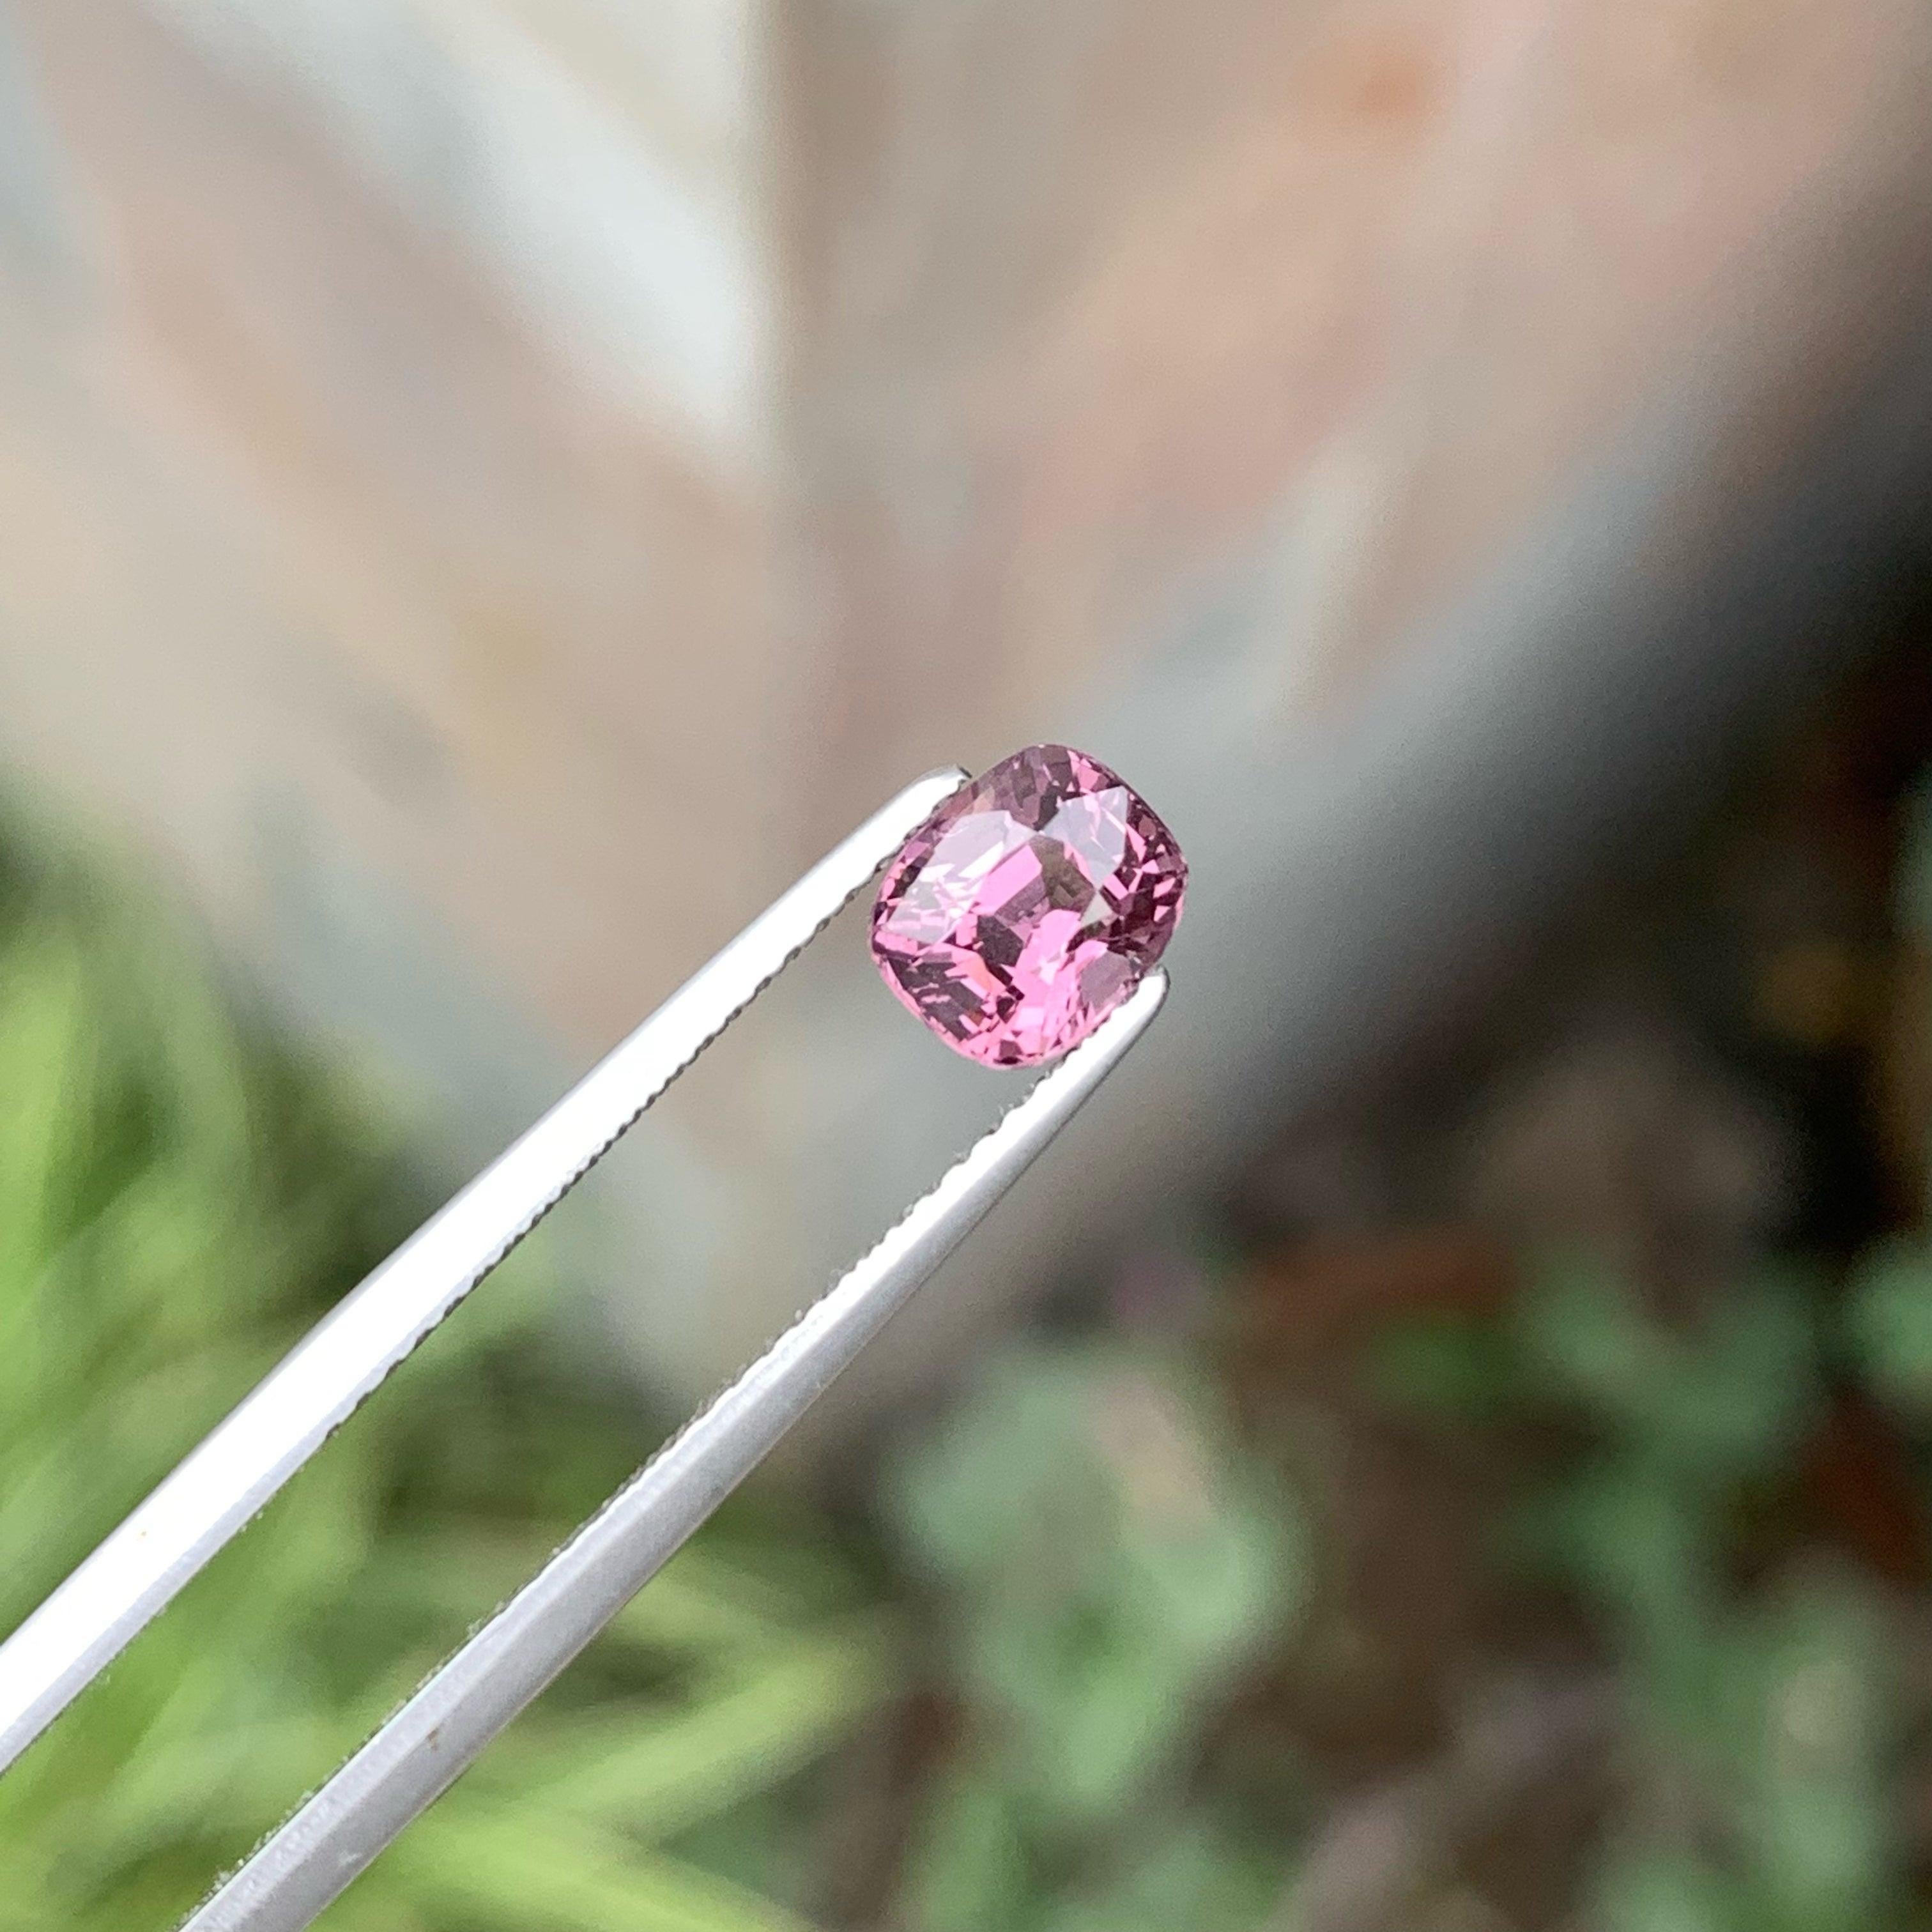 Brilliant Cut Natural Spinel Gemstone, Available For Sale At Wholesale Price Natural High Quality 1.25 Carats Unheated Natural Spinel from Burma.

Product Information:
GEMSTONE TYPE: Brilliant Cut Natural Spinel Gemstone
WEIGHT: 1.25